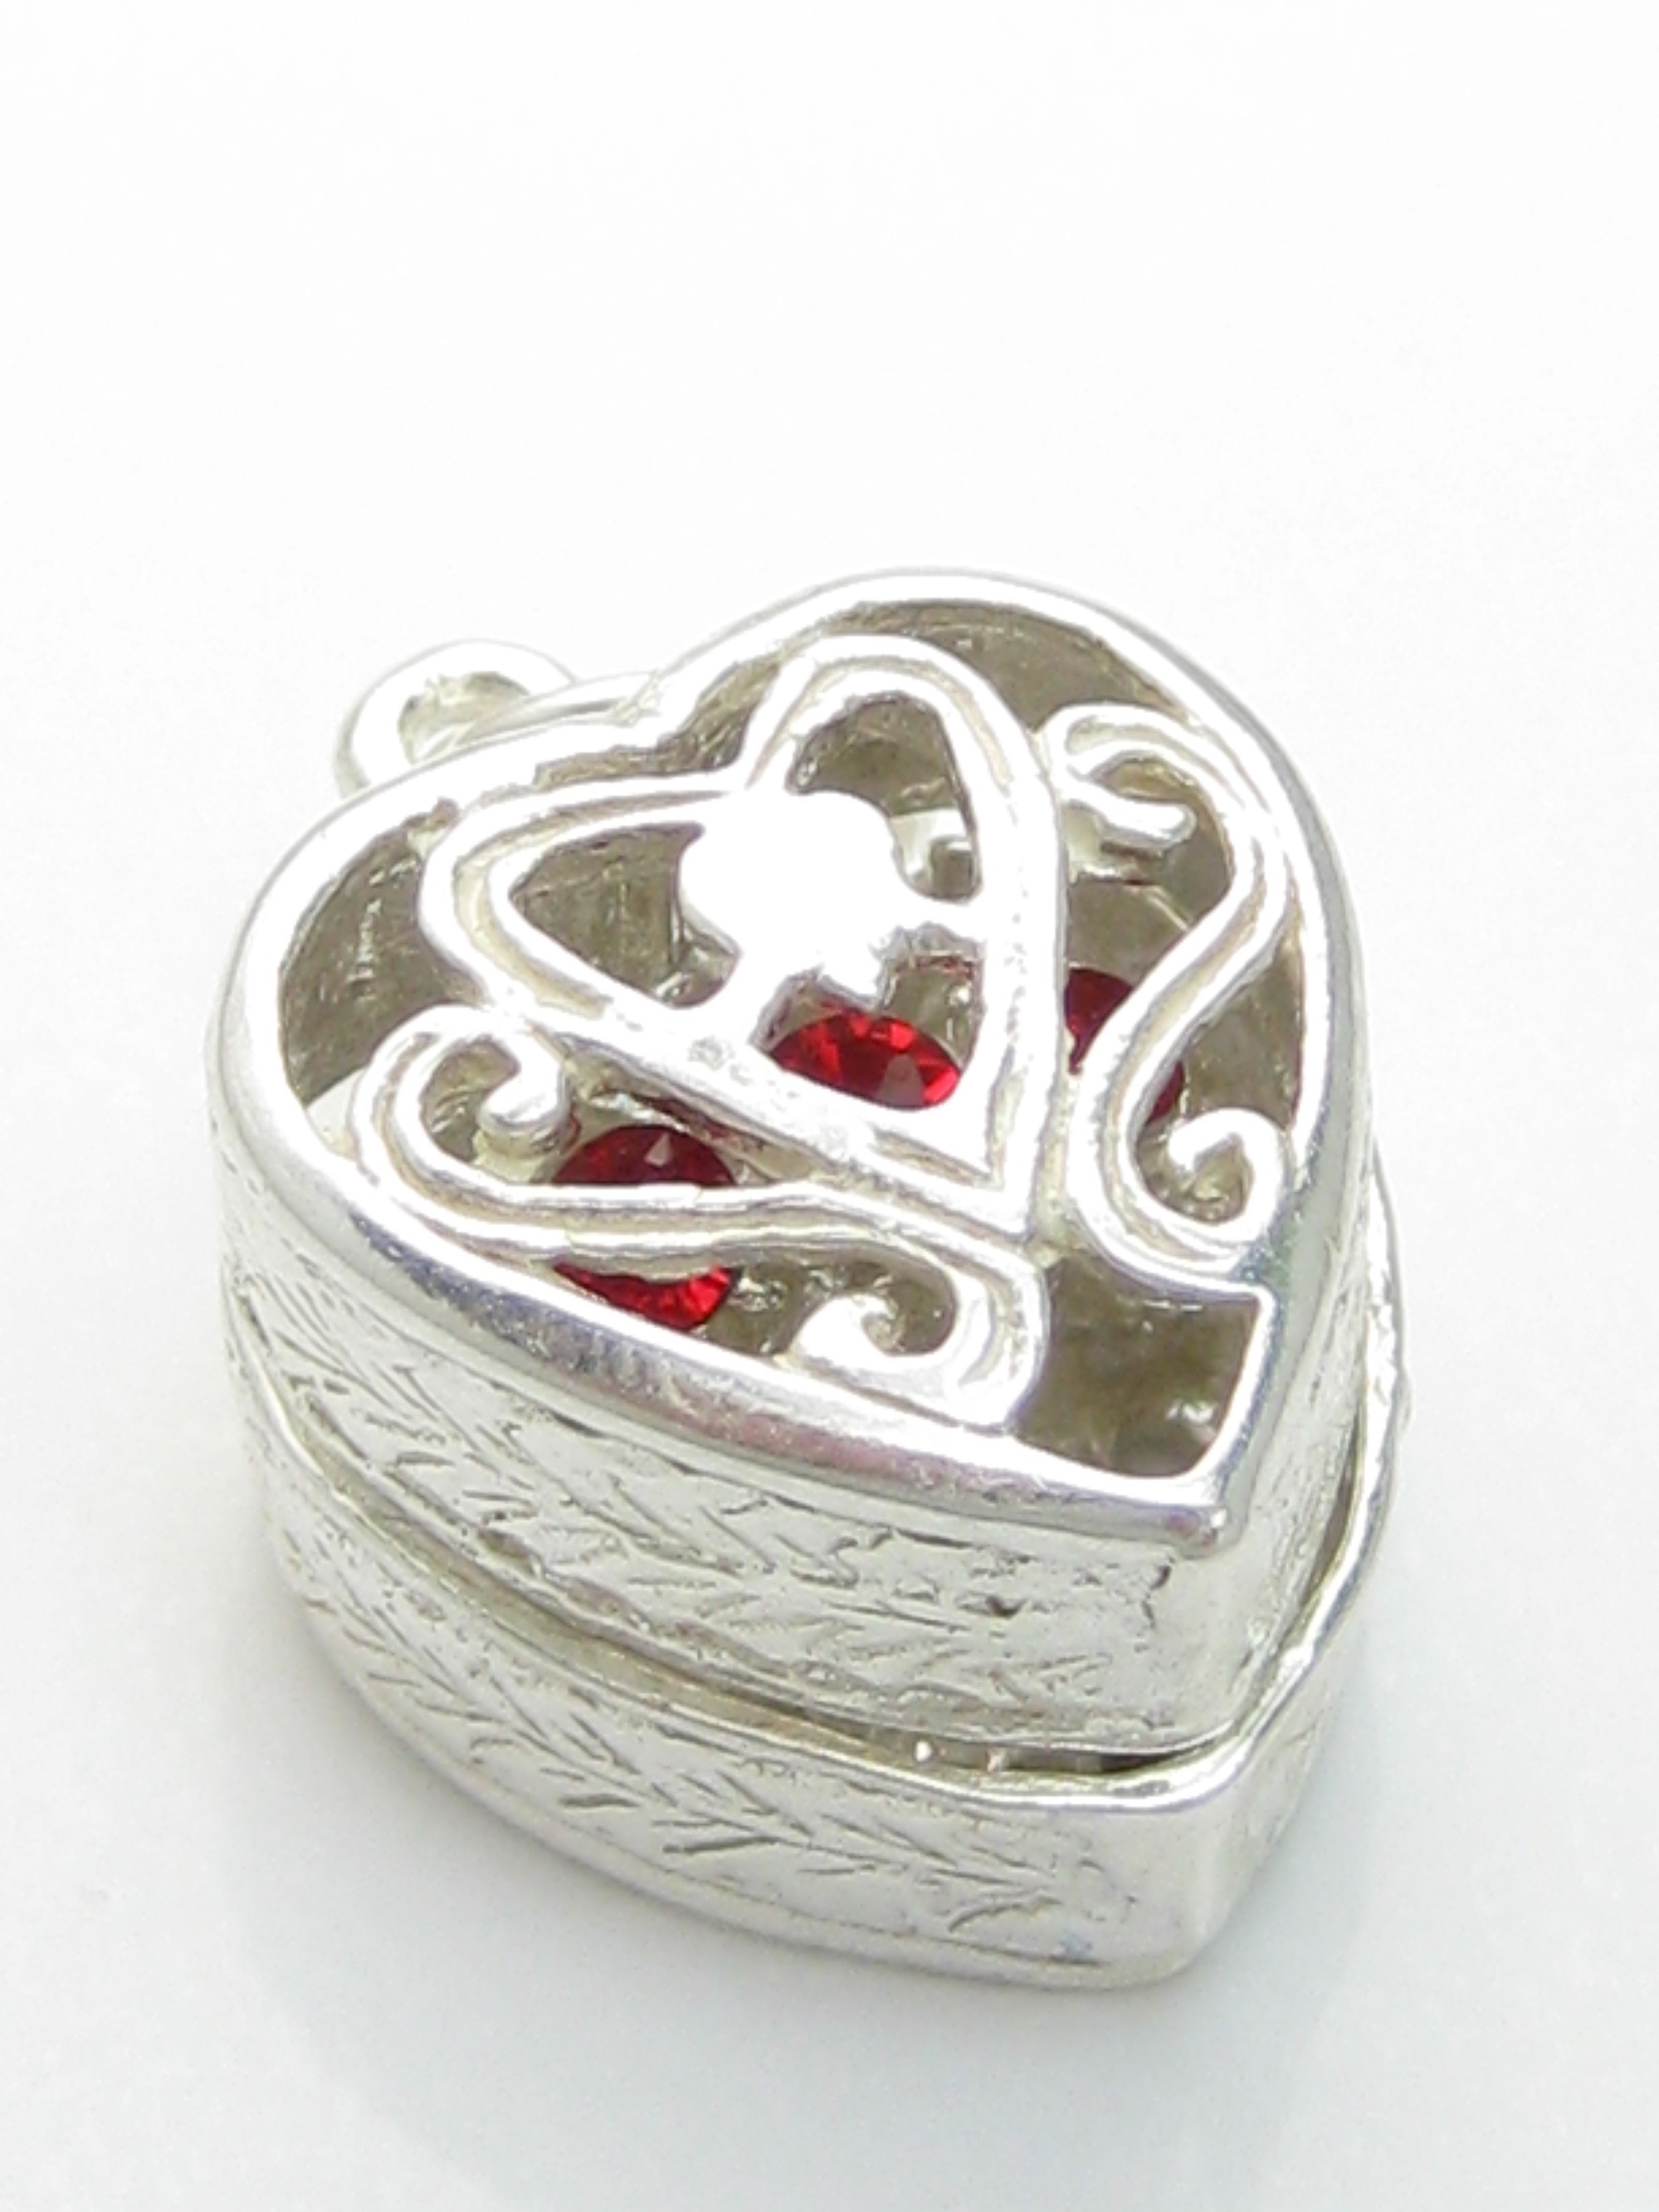 BEAUTIFUL ' HEART RING BOX ' OPENING STERLING SILVER CHARM